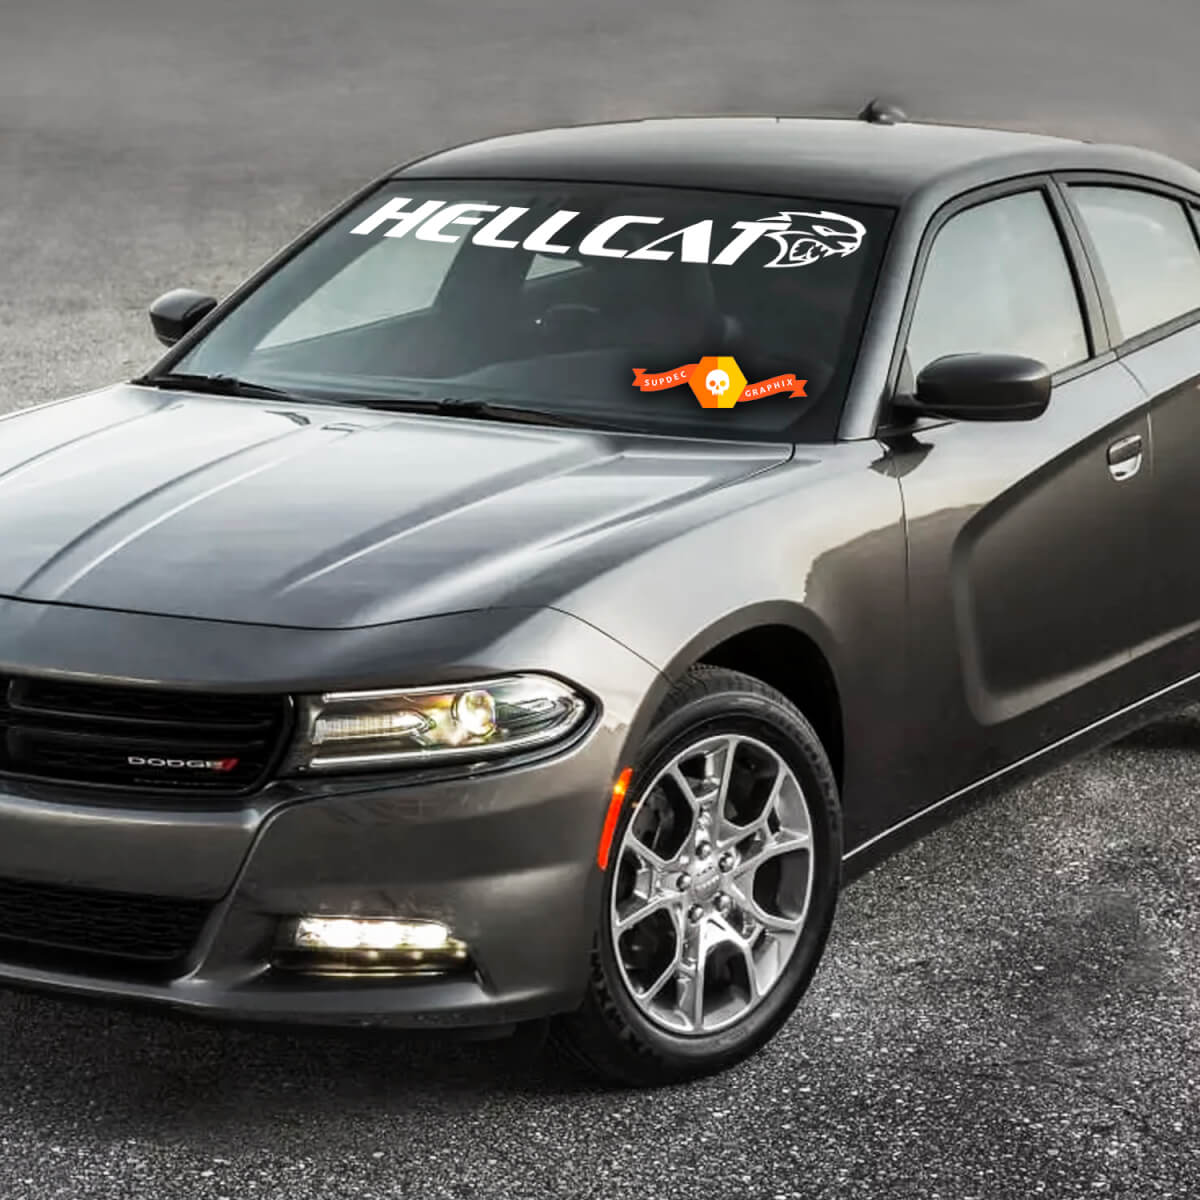 Dodge HellCat Windshield Decal Sticker graphics fits to models 11-16 